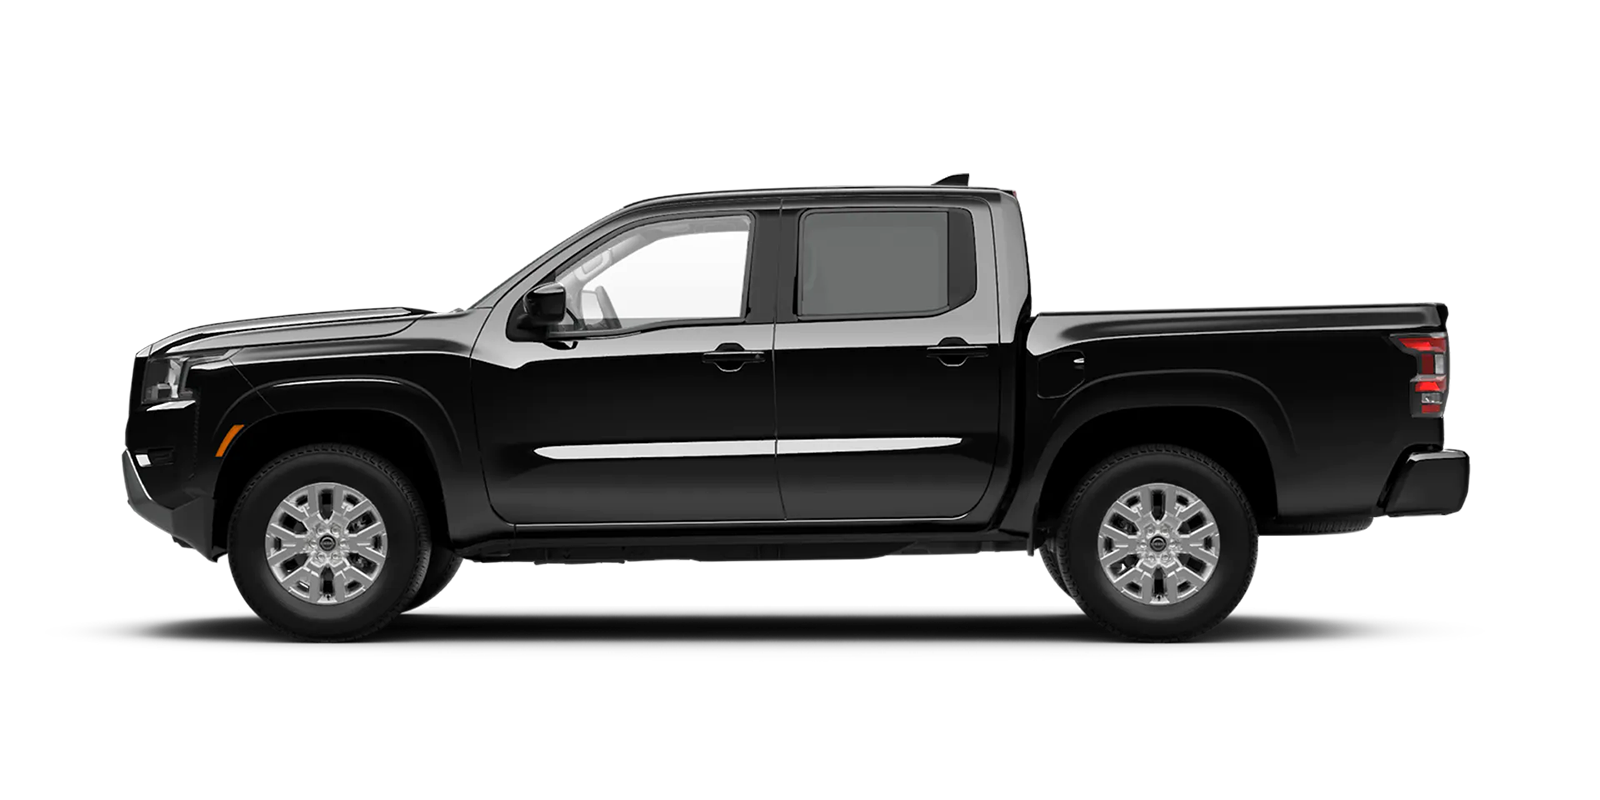 2022 Frontier Crew Cab SV 4x2 in Super Black | Mountain View Nissan Of Cleveland in McDonald TN